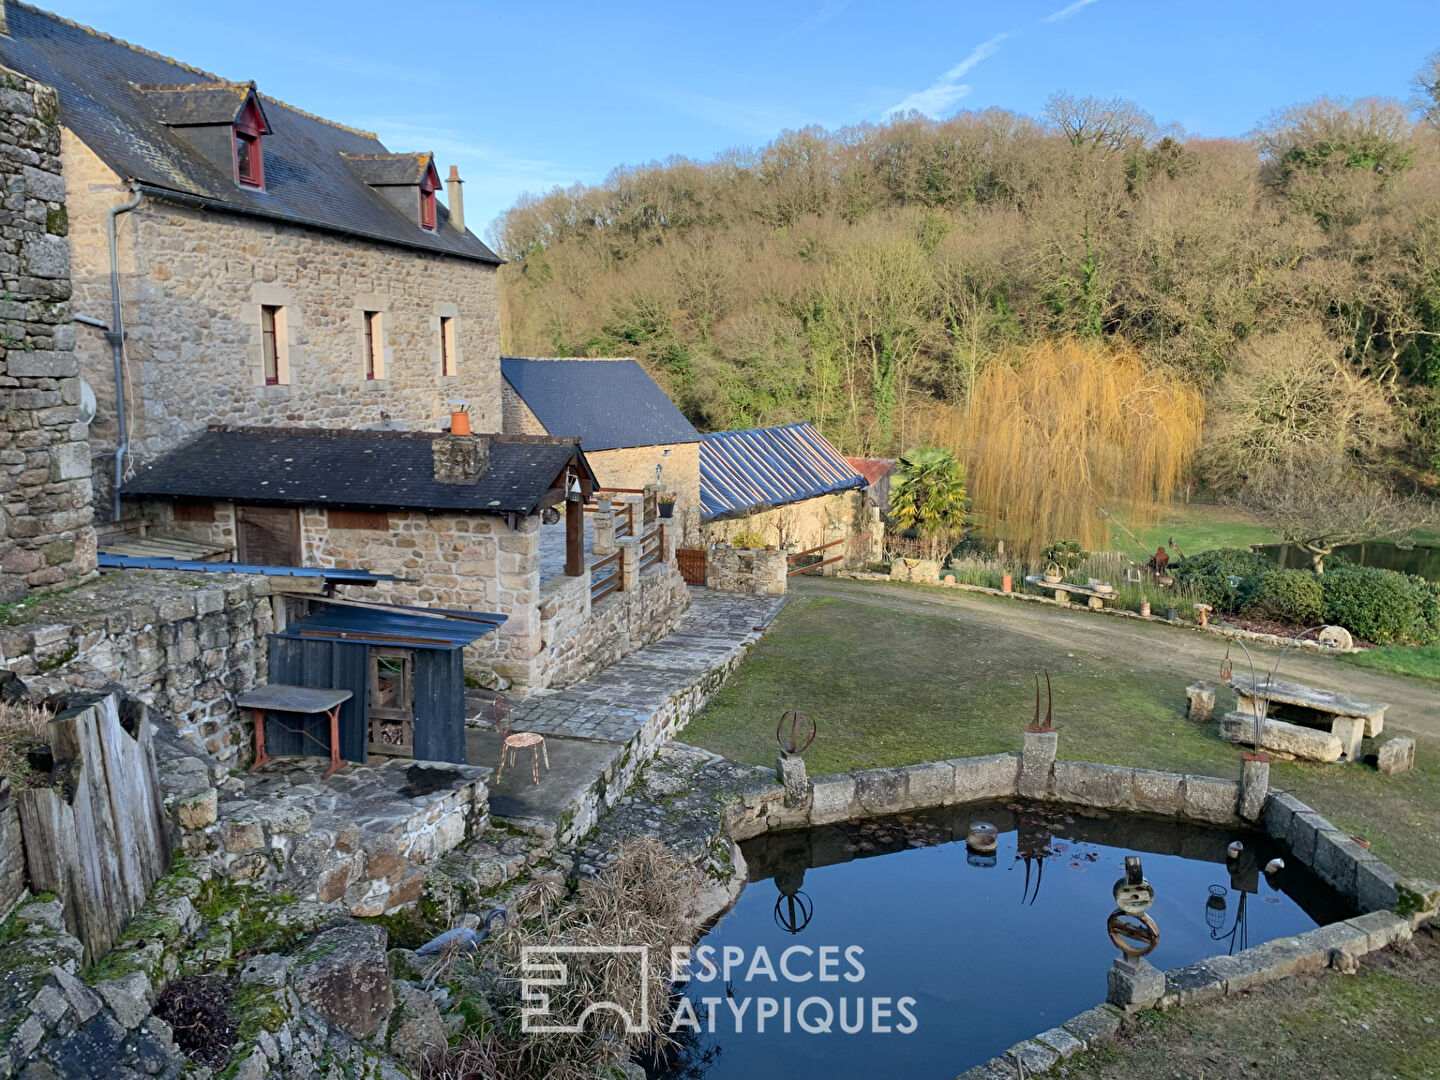 Bucolic atmosphere, old mill and its dwelling house 63527sqm land 3 ponds